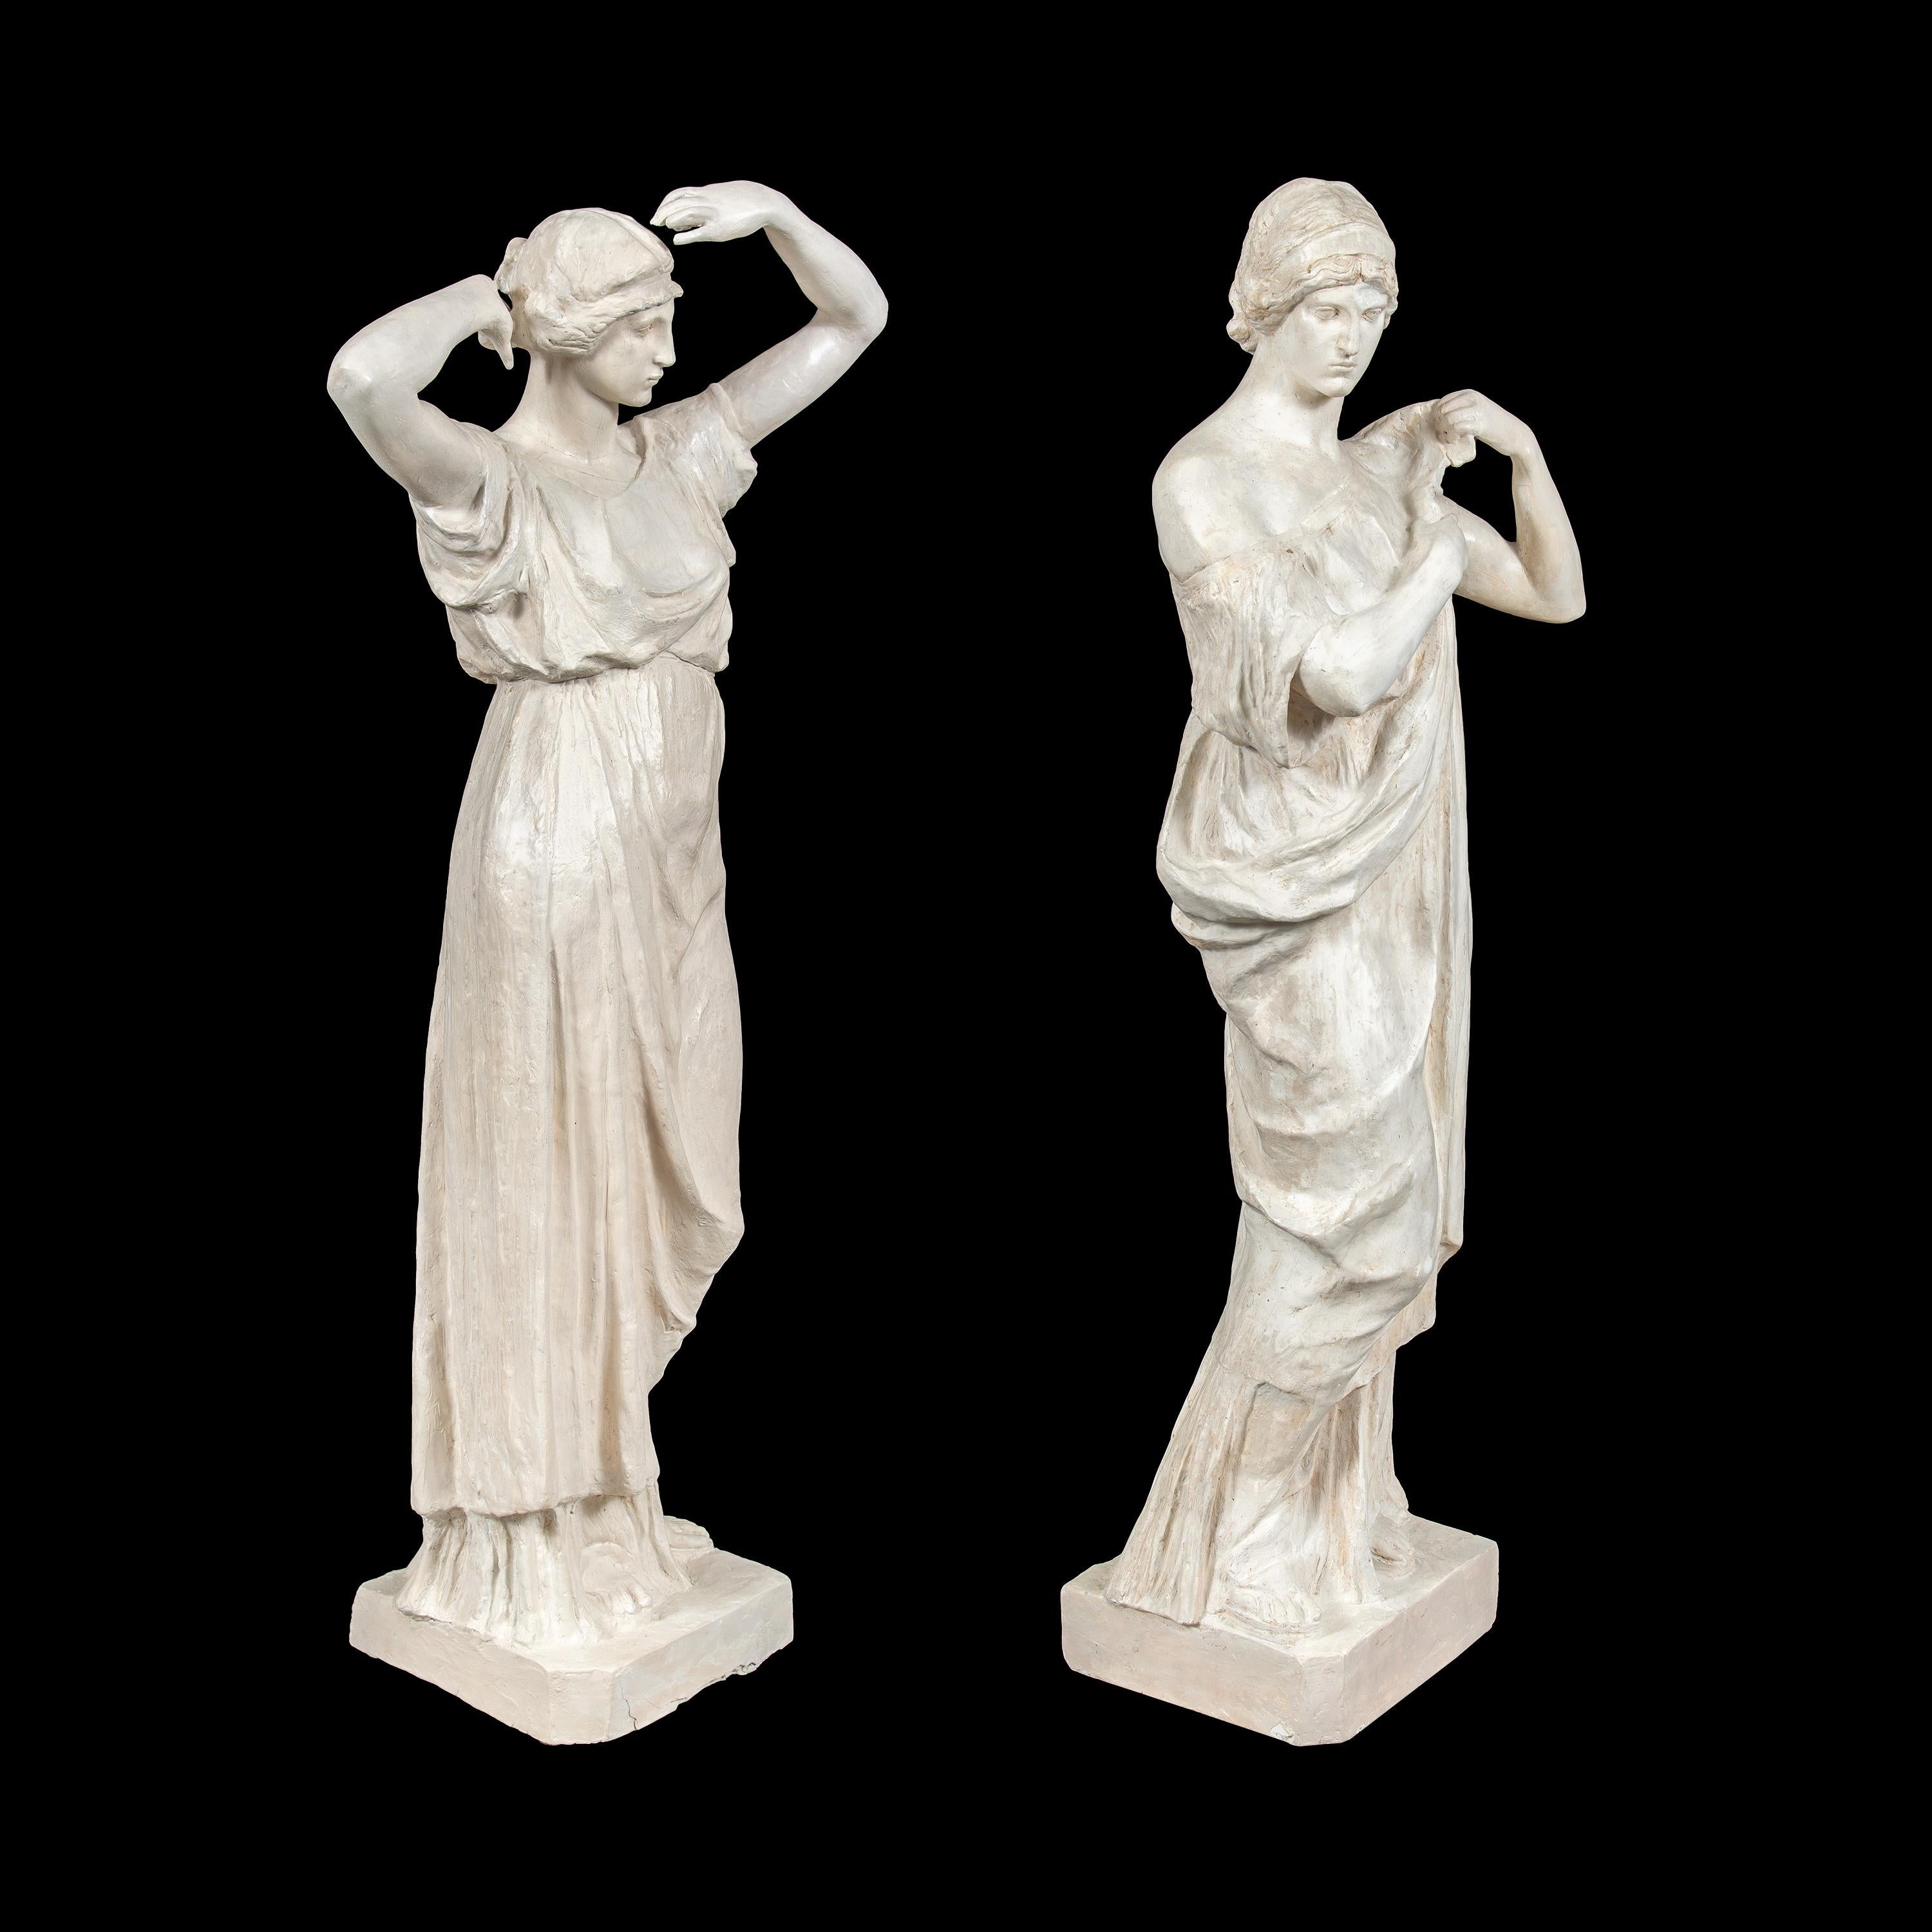 Neoclassical sculpture in Rome- Pair of 19th century Italian scagliola - Figures - Sculpture by Unknown